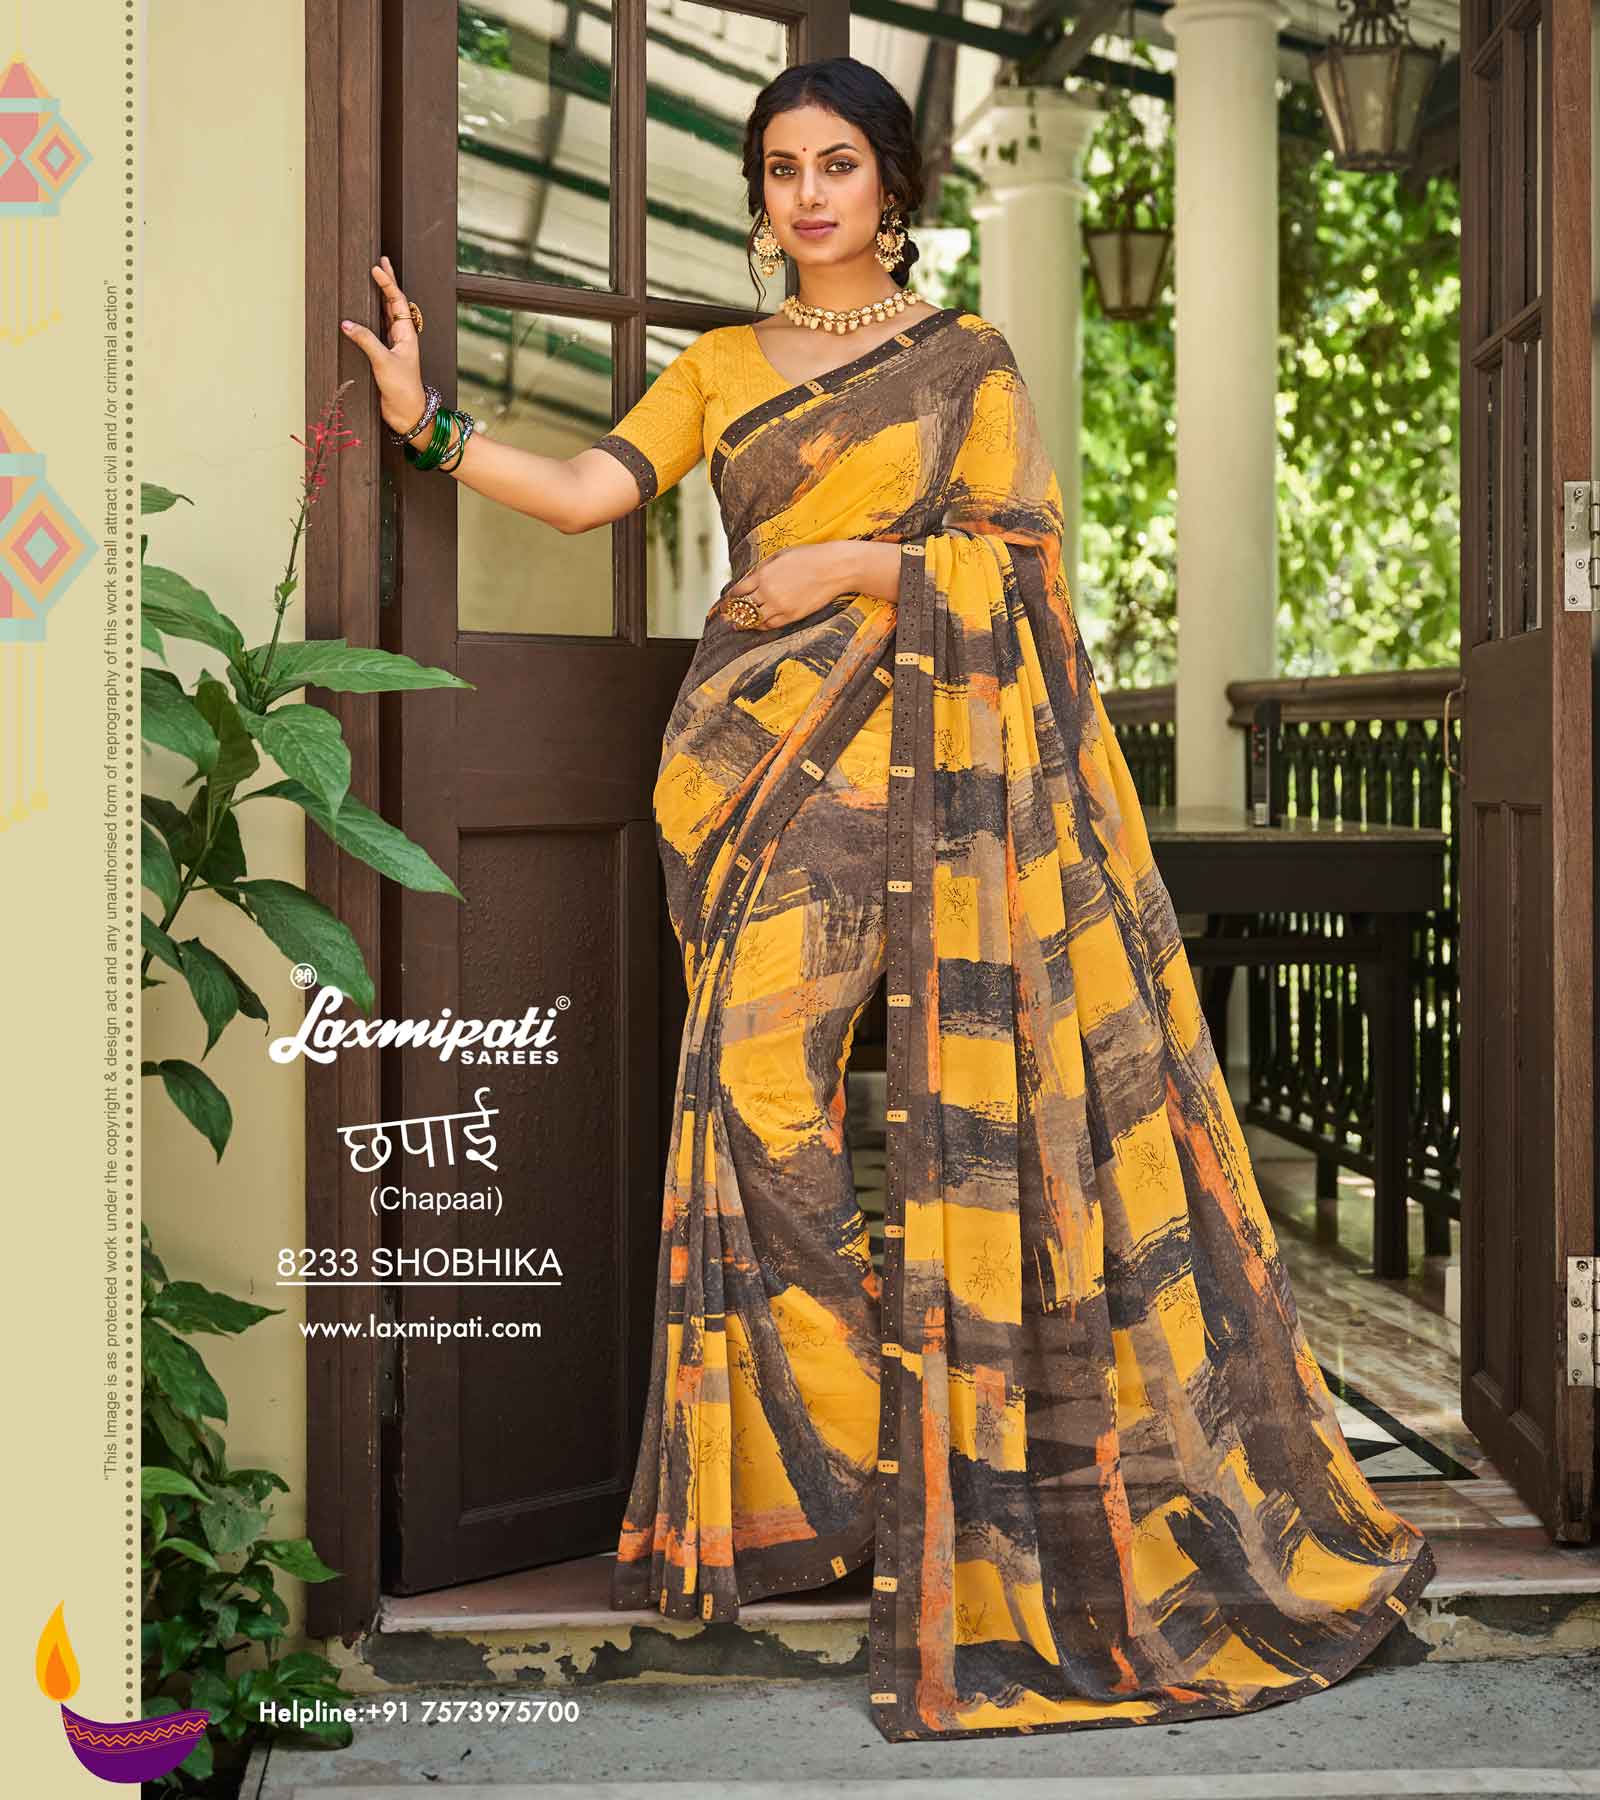 Laxmipati Trimukhi Chiffon with fancy look saree collection